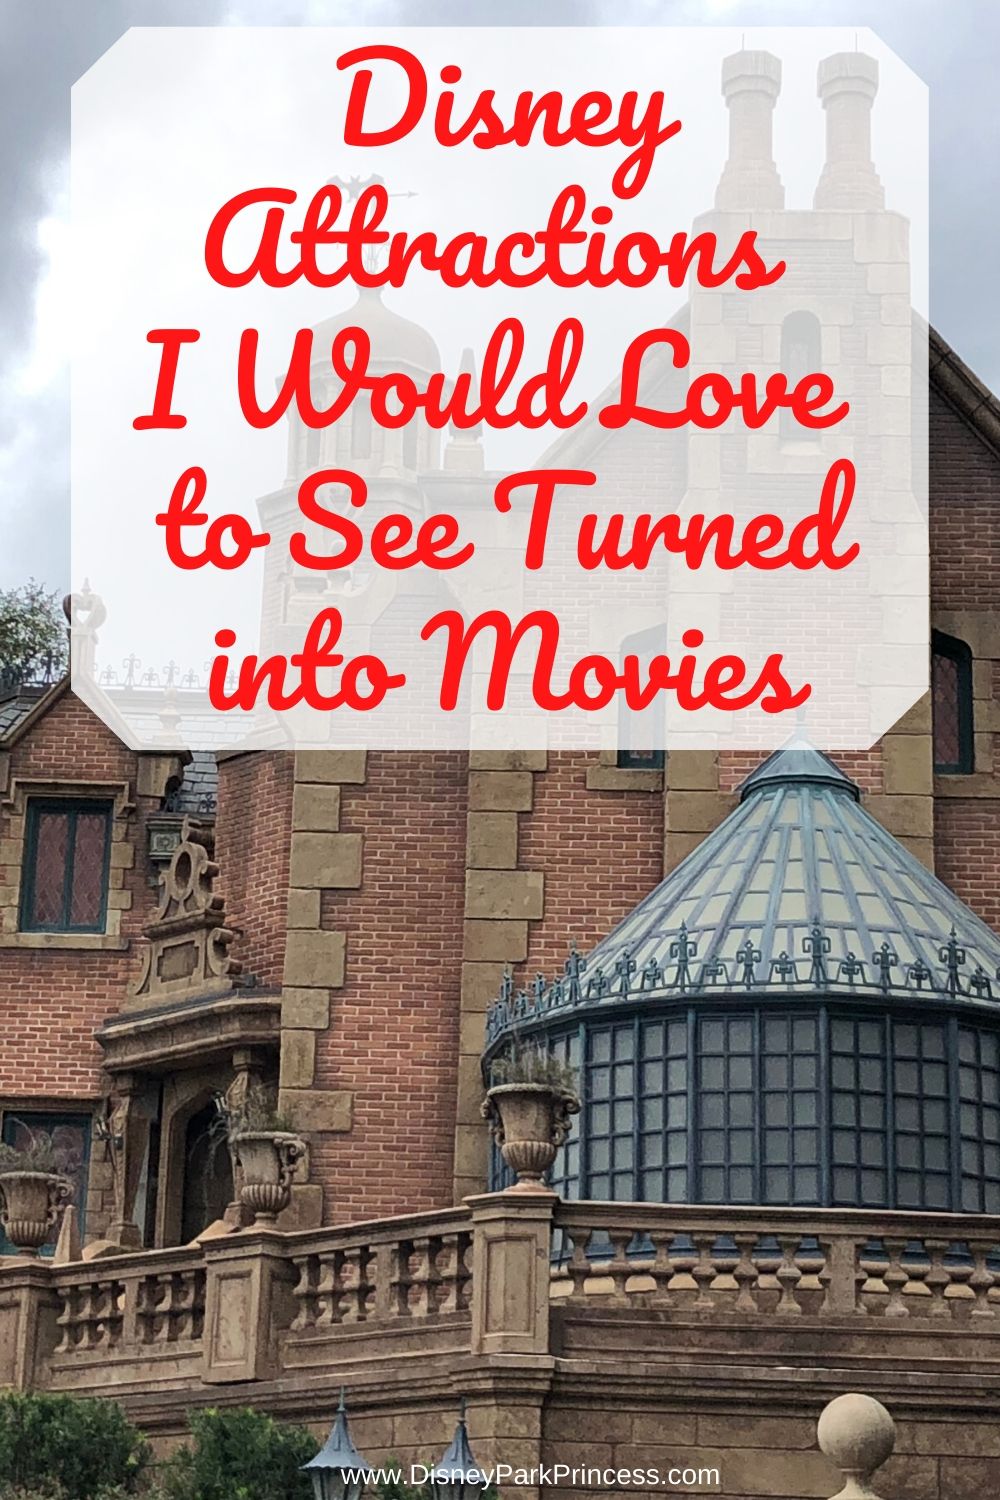 Here are a few attractions I would love to see Disney make into movies, including a plot summary of what I'd love to see. #disney #waltdisneyworld #wdw